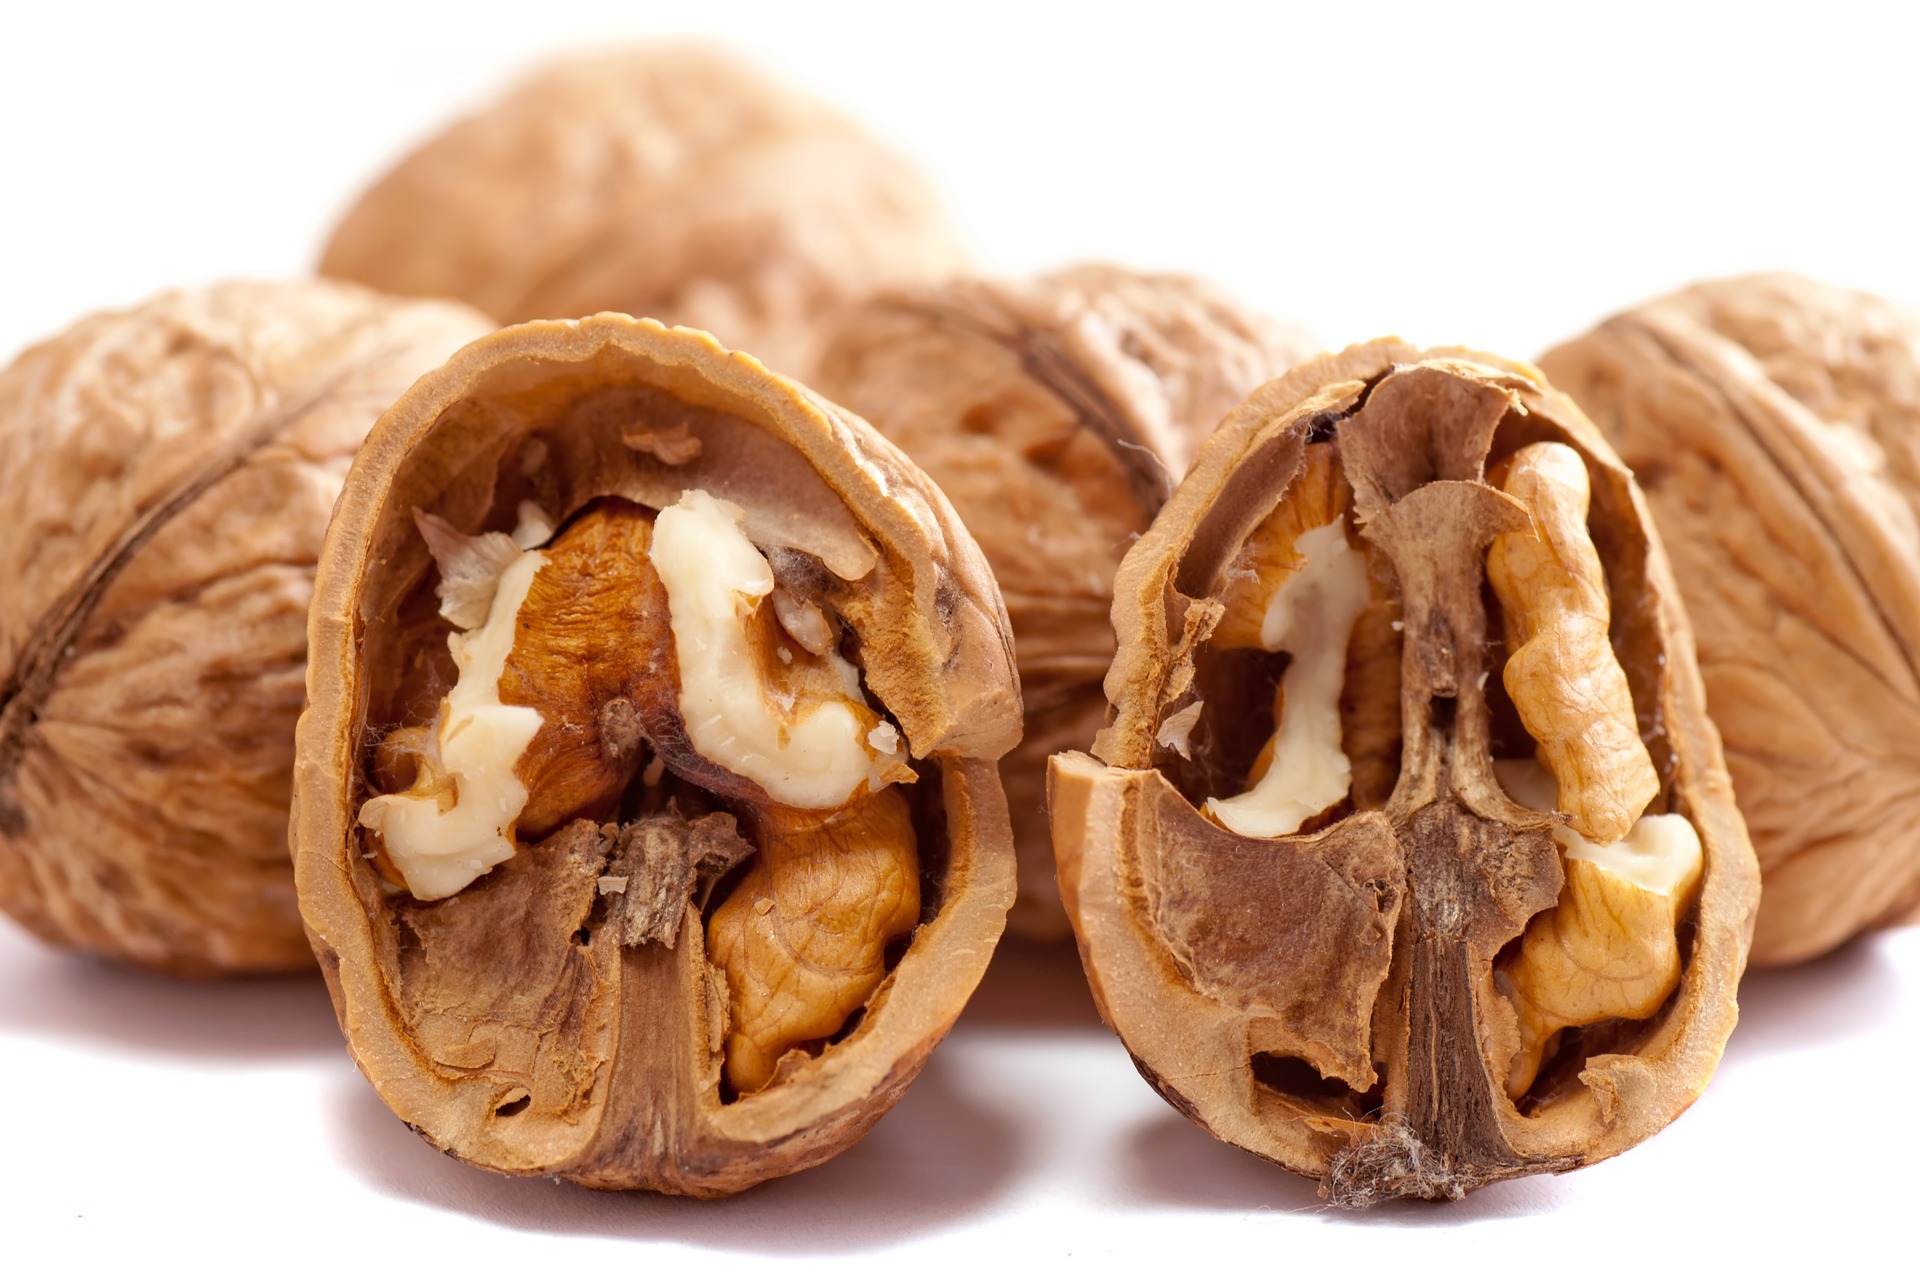 7 Health Benefits of Walnuts You Didn't Know About